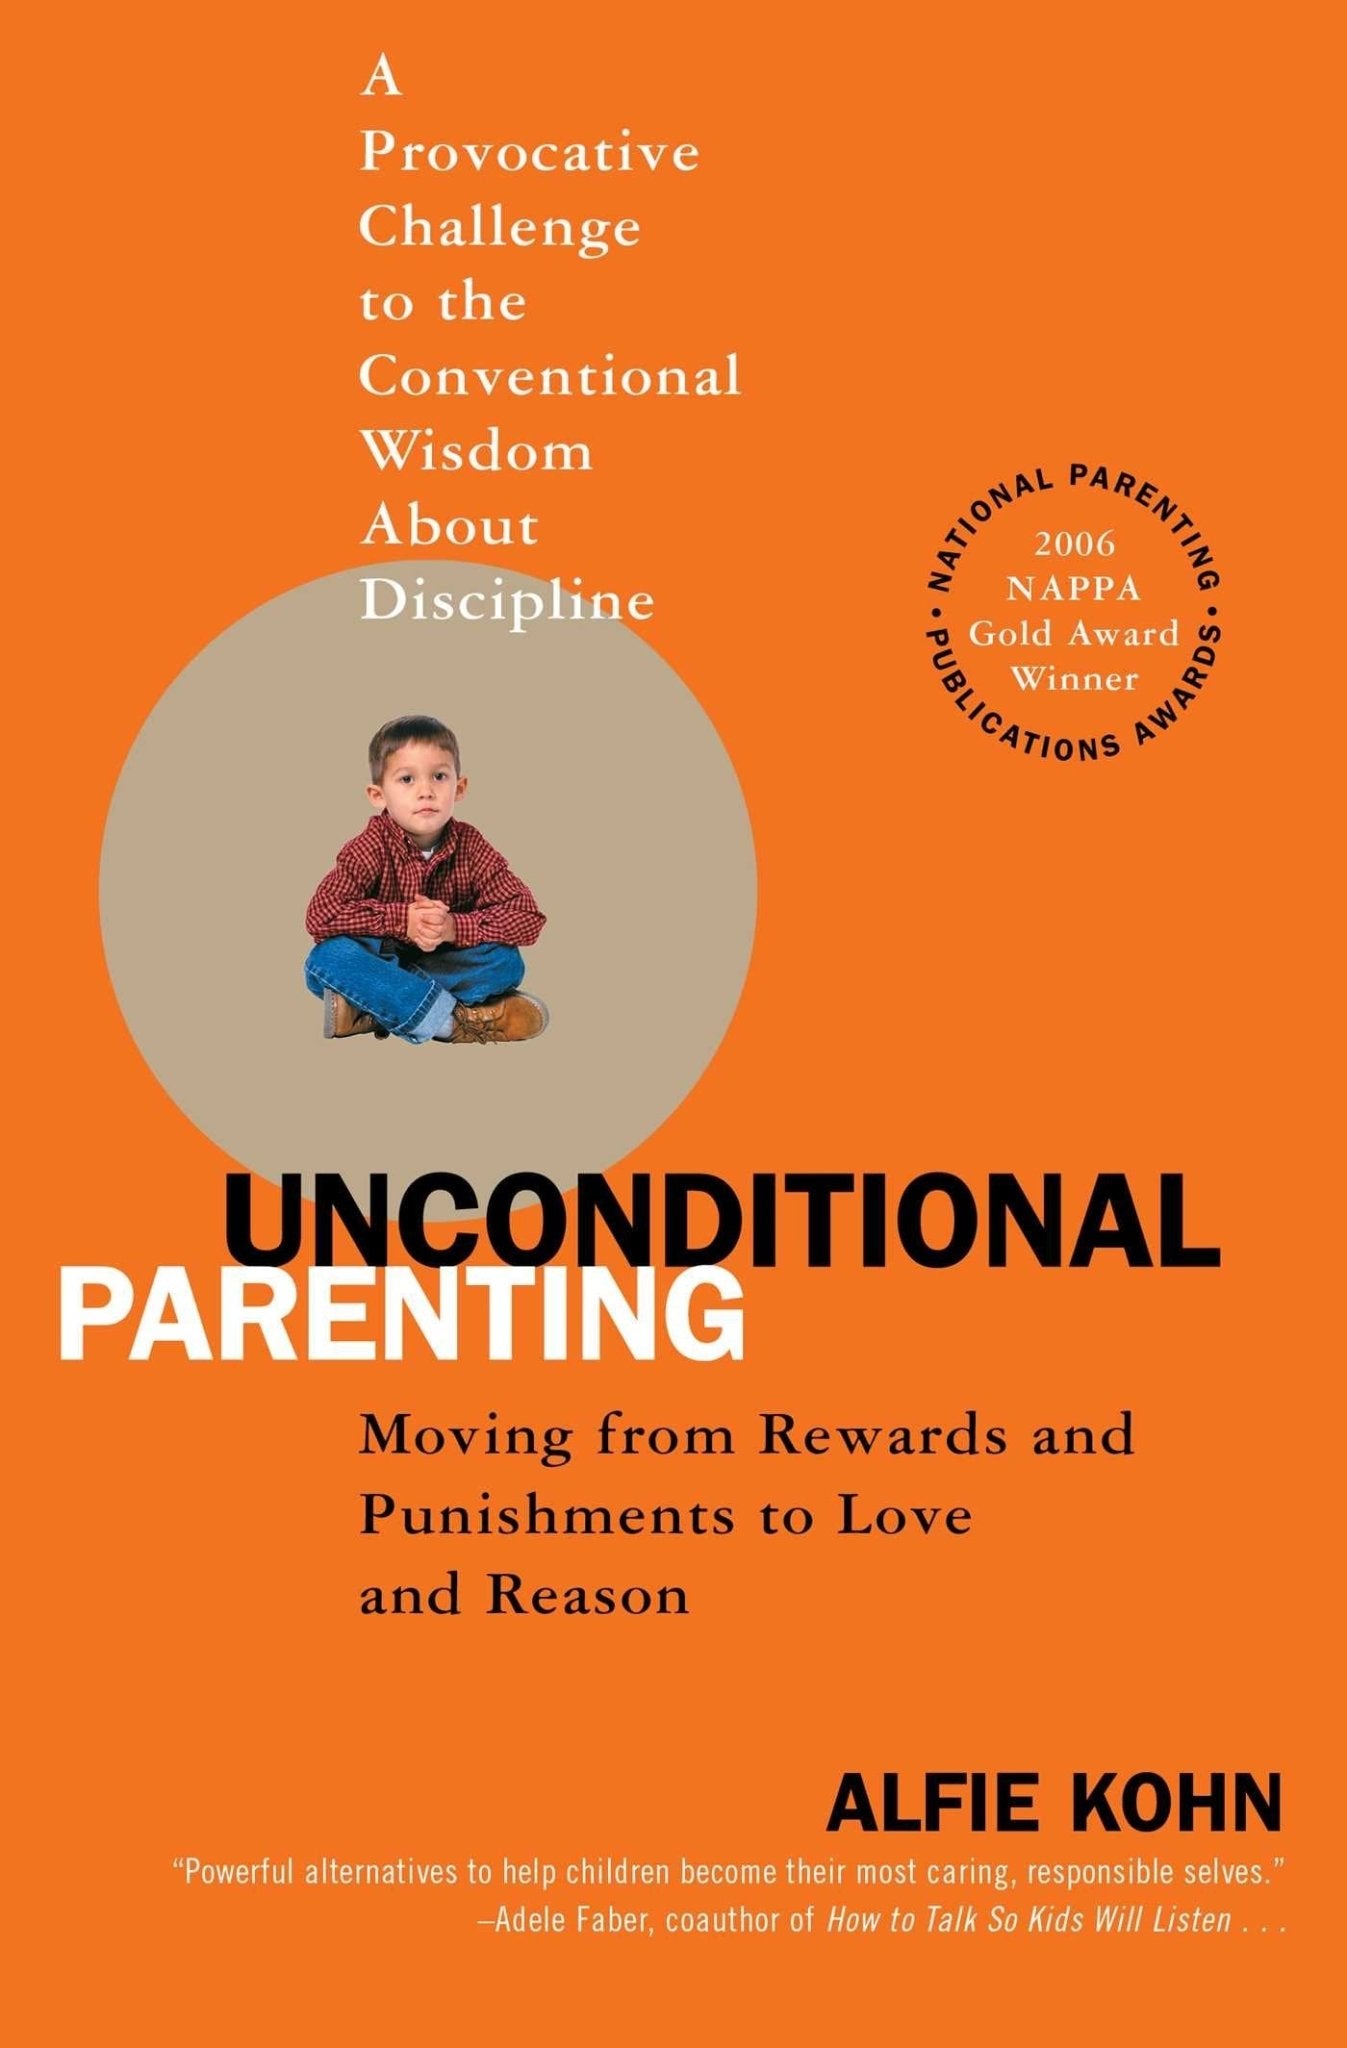 Unconditional Parenting - Spiral Circle